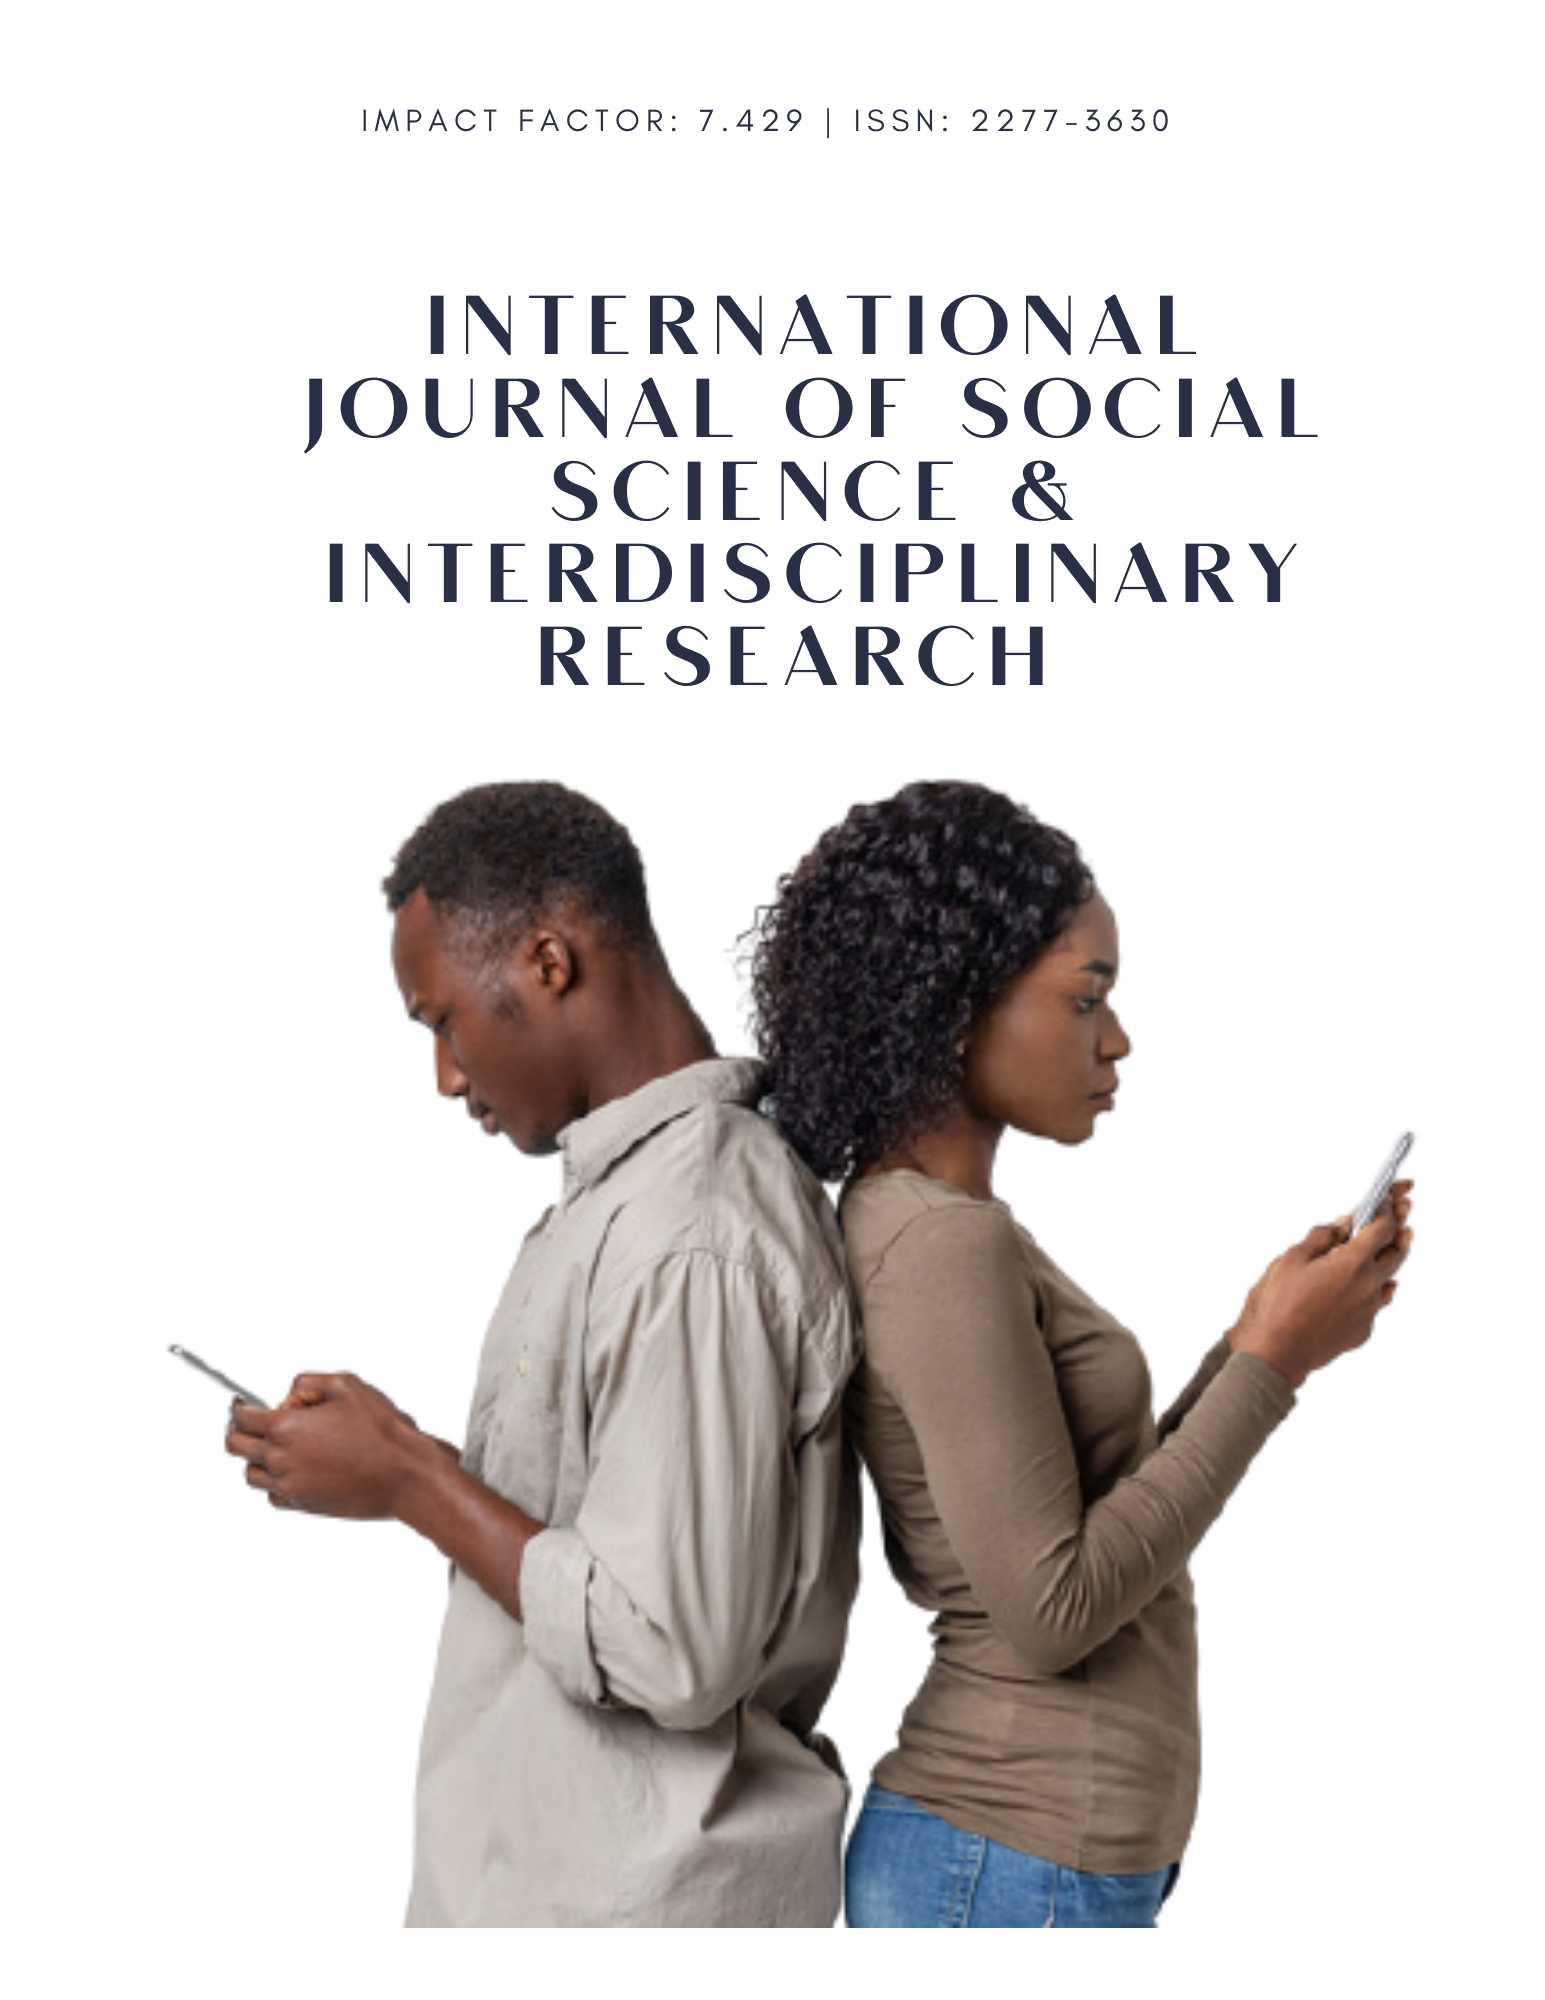 					View Vol. 11 No. 01 (2022): INTERNATIONAL JOURNAL OF SOCIAL SCIENCE & INTERDISCIPLINARY RESEARCH  ISSN: 2277-3630  Impact factor: 7.429
				